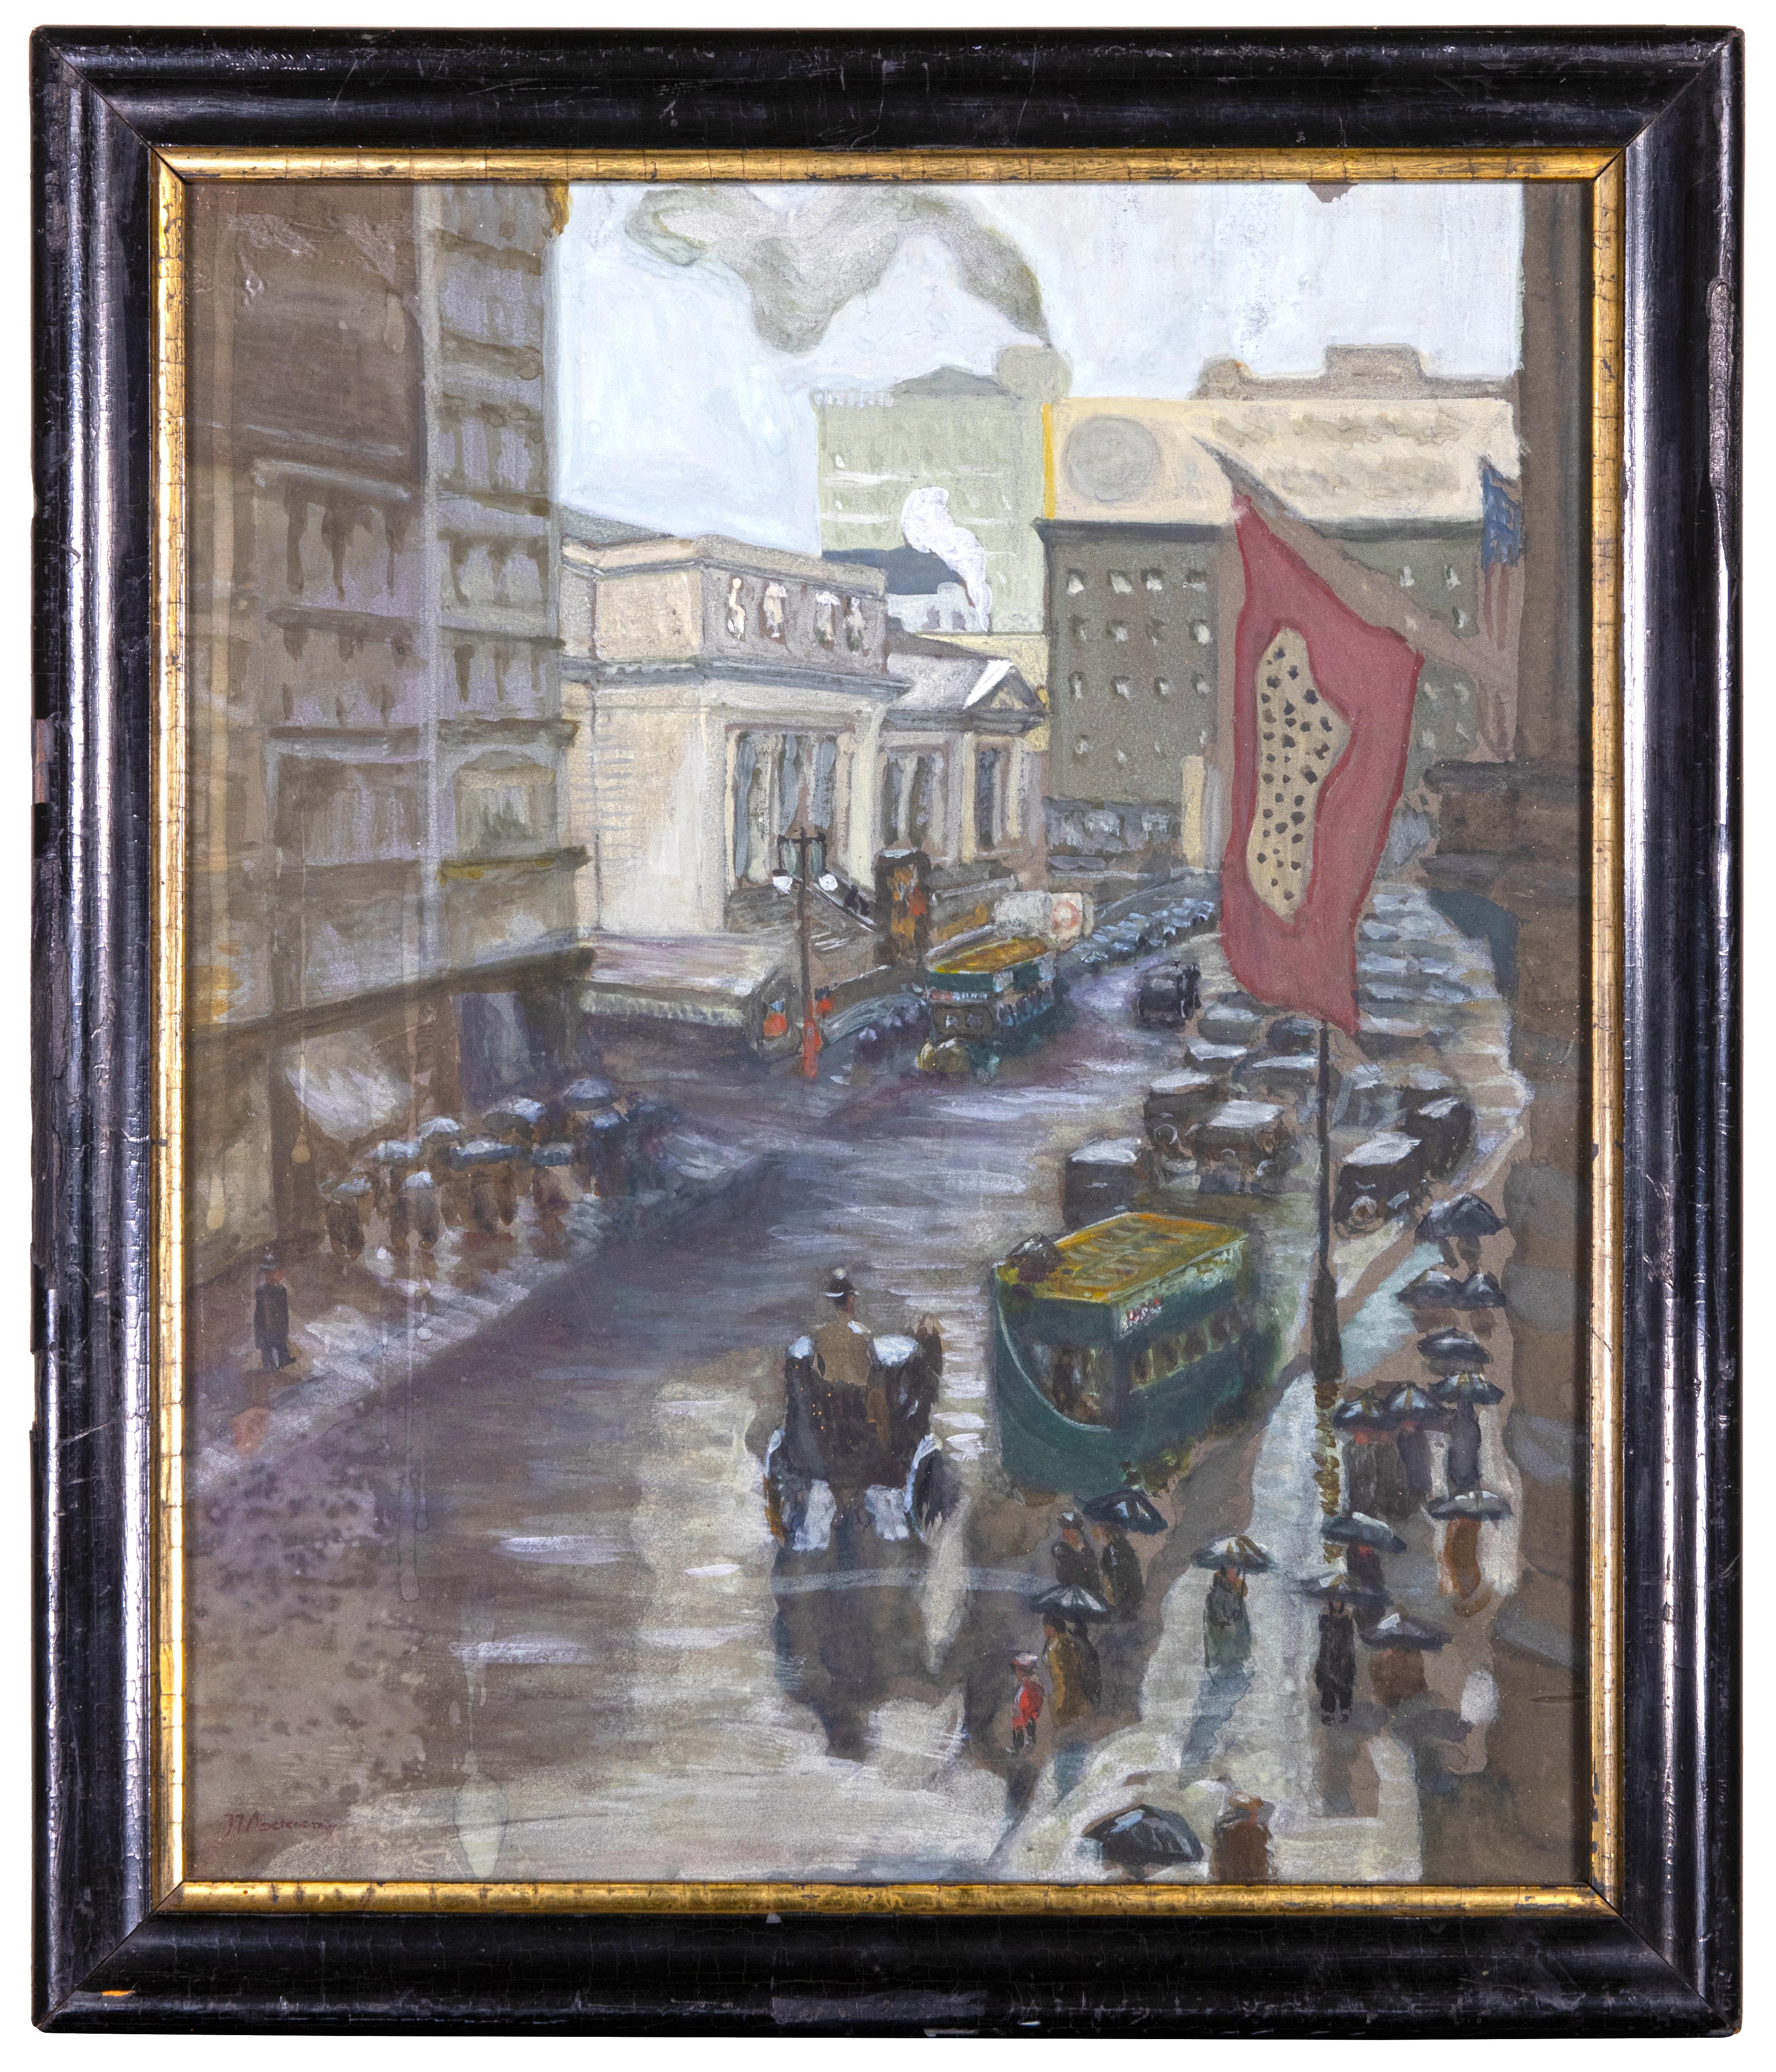 Unknown Landscape Art - New York - Early 20th Century Fifth Avenue - Watercolor Early 1900